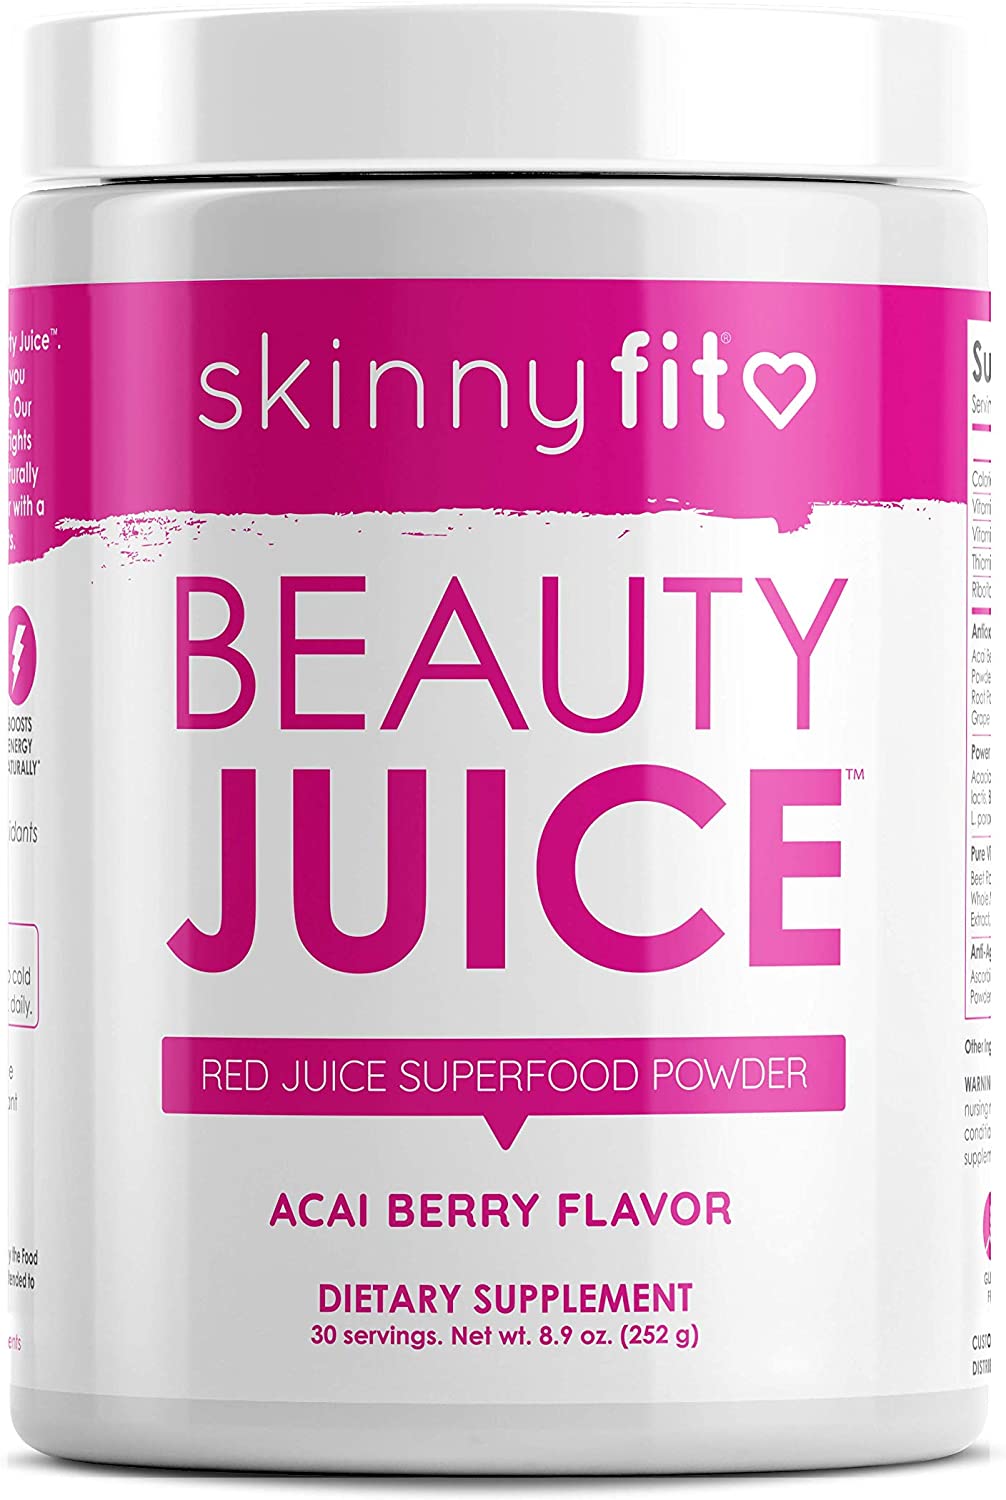 SkinnyFit Beauty Juice-Red Superfood Powder-Acai Berry Flavor-Anti-Aging-Aids in Digestion-Helps Boost Mood and Immunity-Prebiotics and Probiotics 30 Servings-Stumbit Beauty